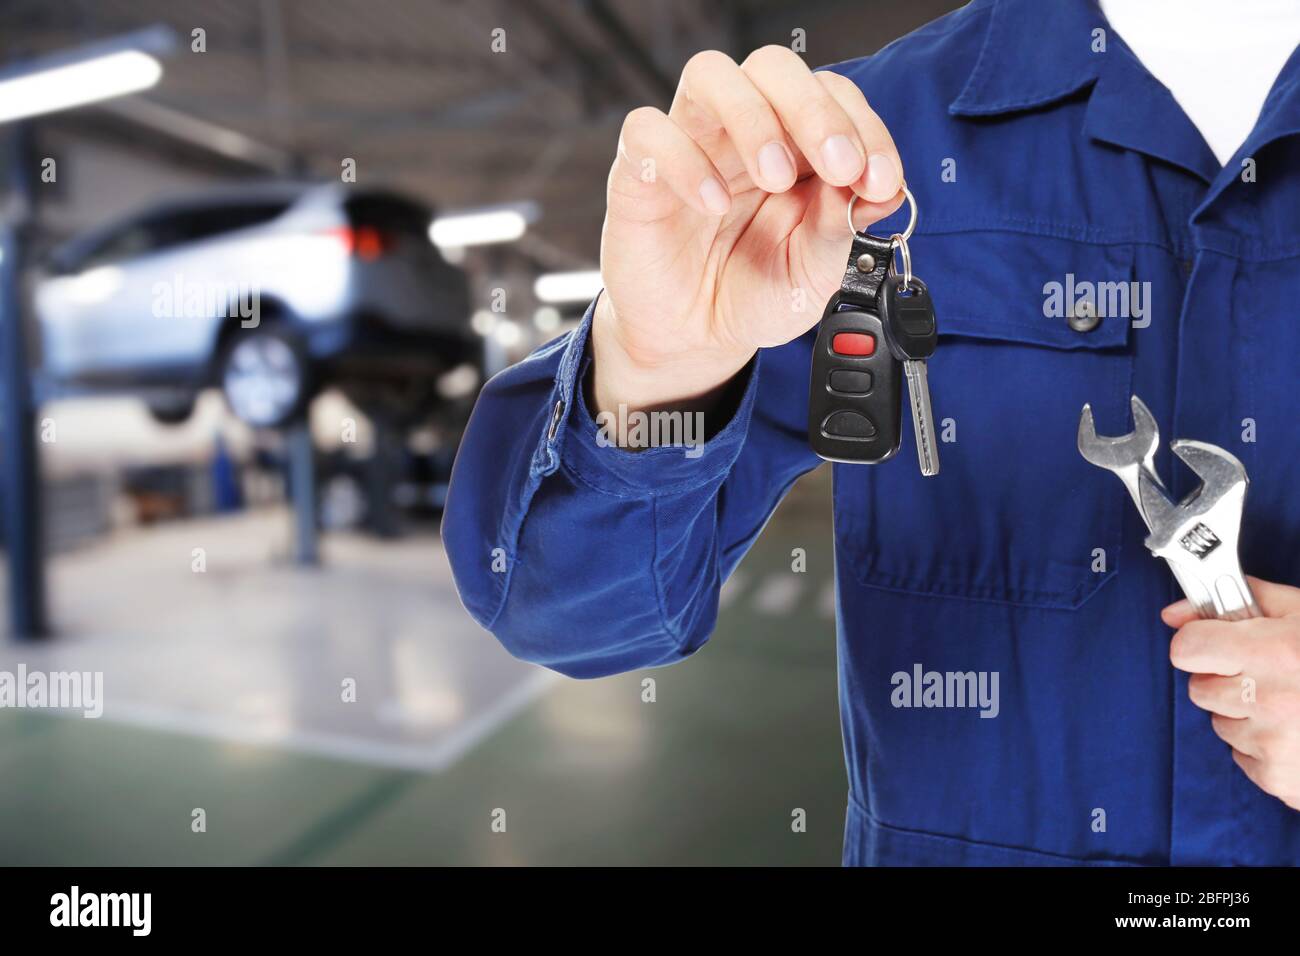 Auto mechanic holding key with tools and workshop on background. Car service concept Stock Photo